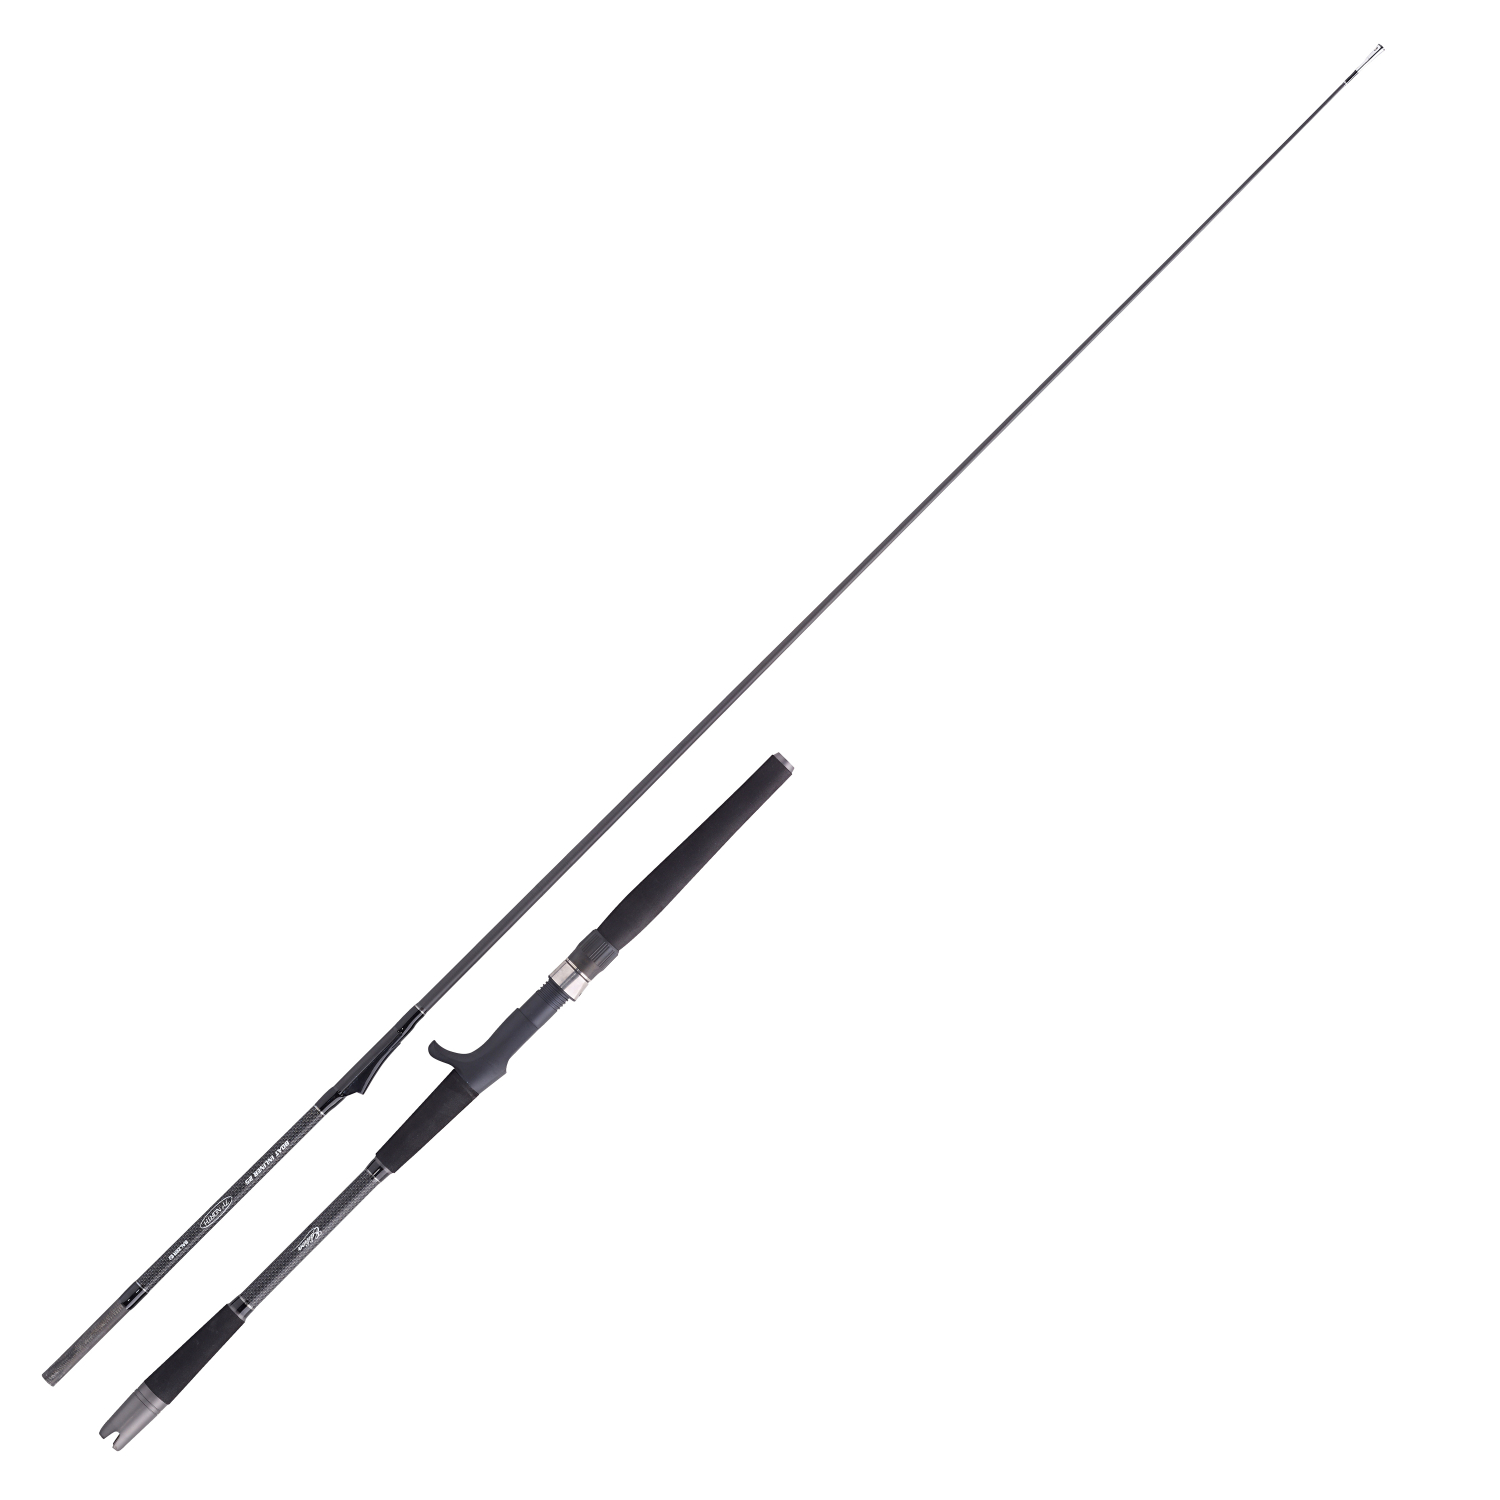 Balzer Sea Fishing Rod 71° North 3.0 BOAT 15 Inliner at low prices